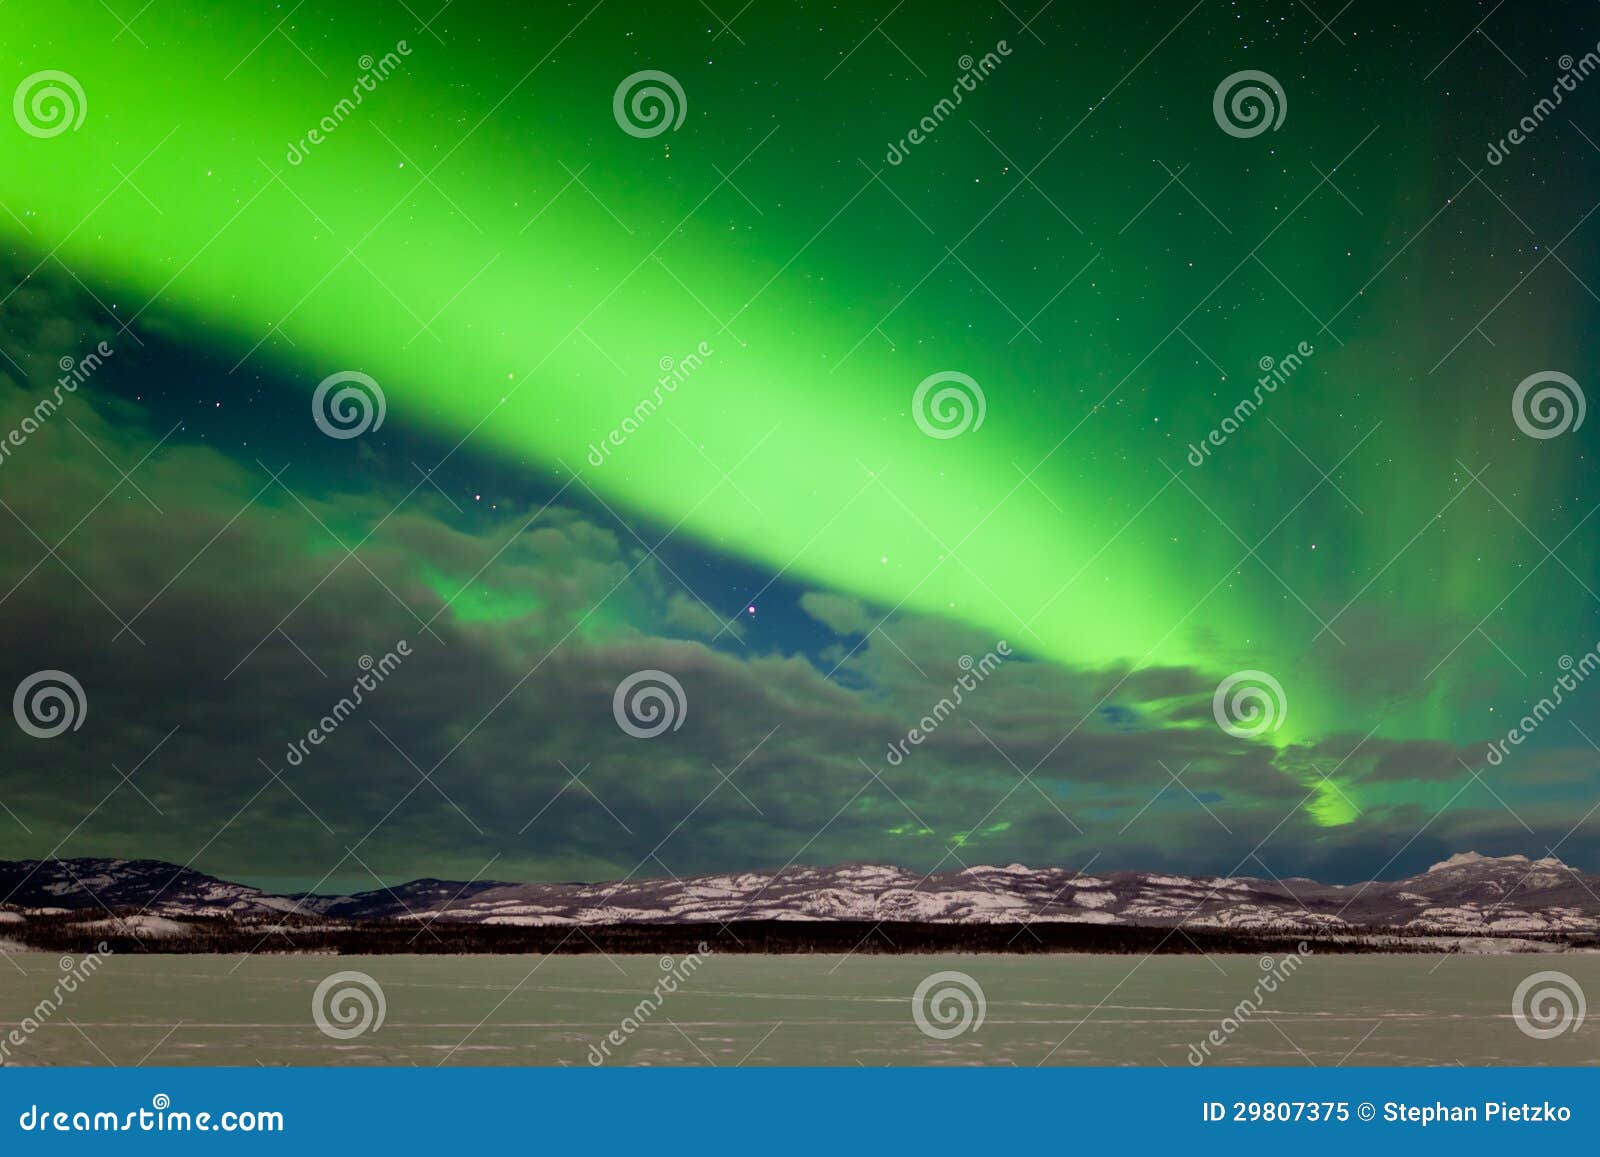 intense band of northern lights in northern winter